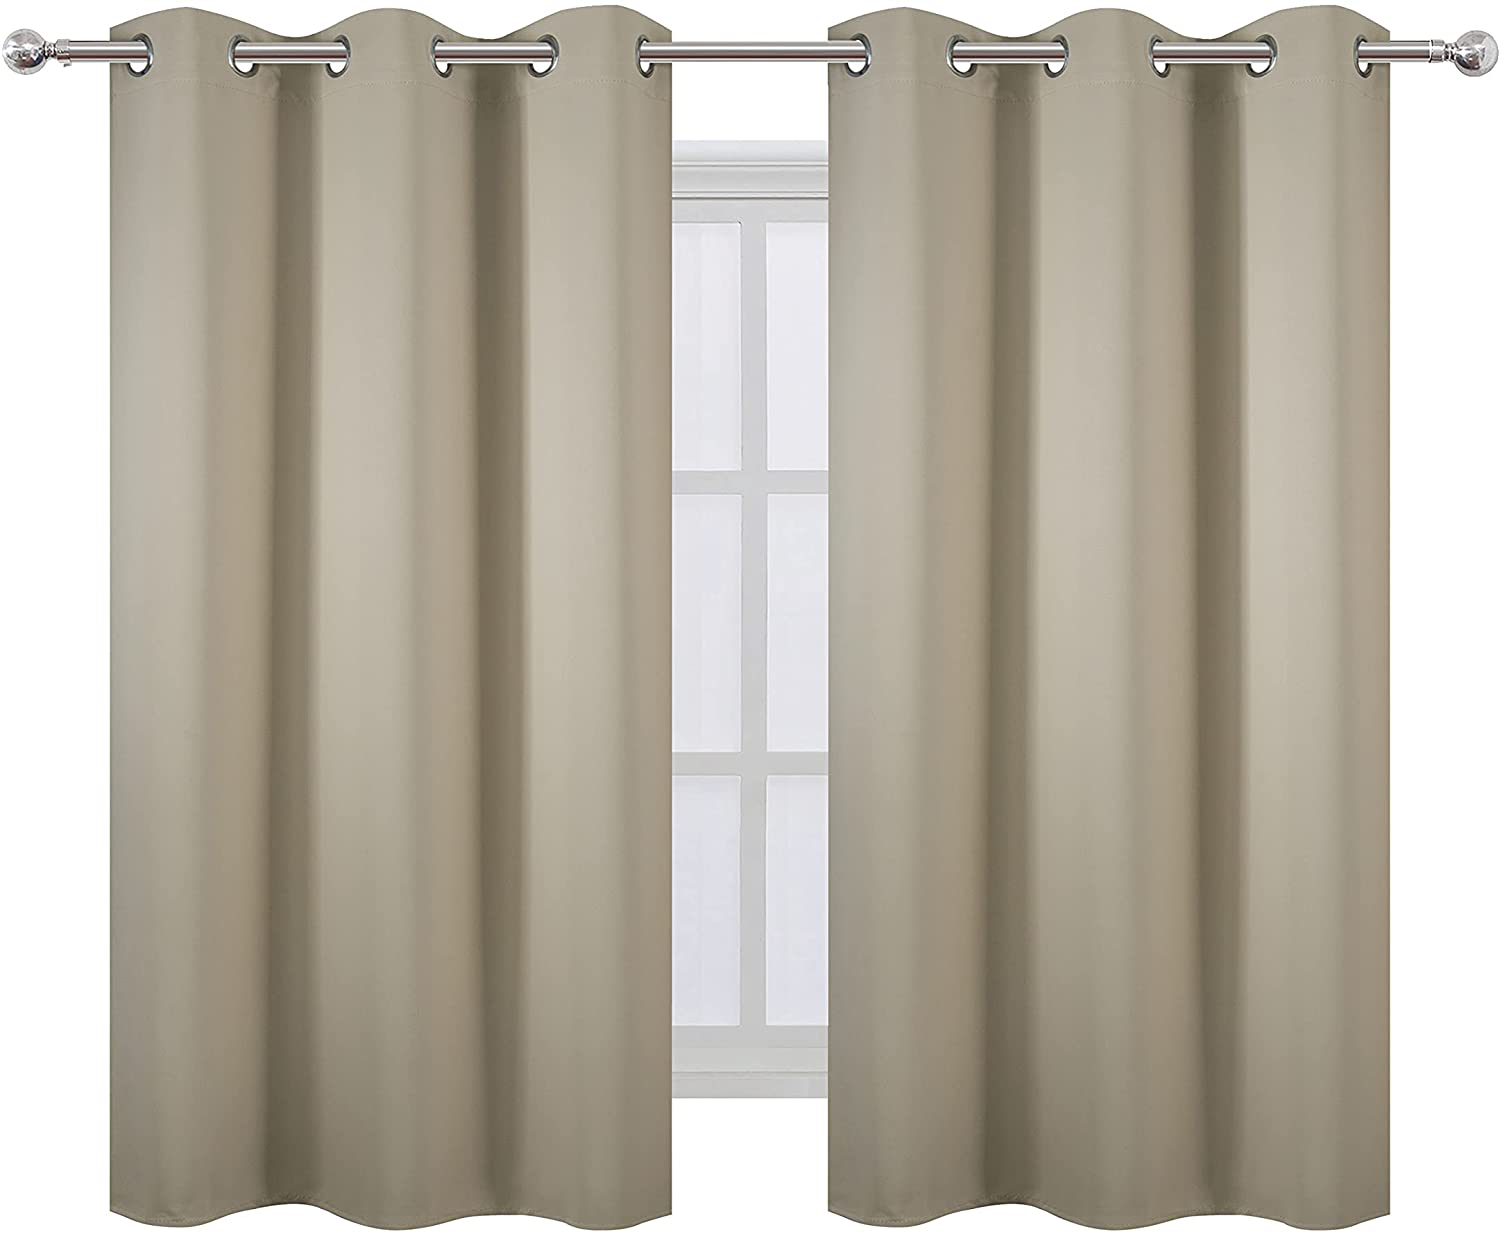 LEMOMO Blackout Curtains 52 x 84 Inch/Beige Curtains Set of 2 Panels/Room Darkening Curtains for Bedroom and Living Room